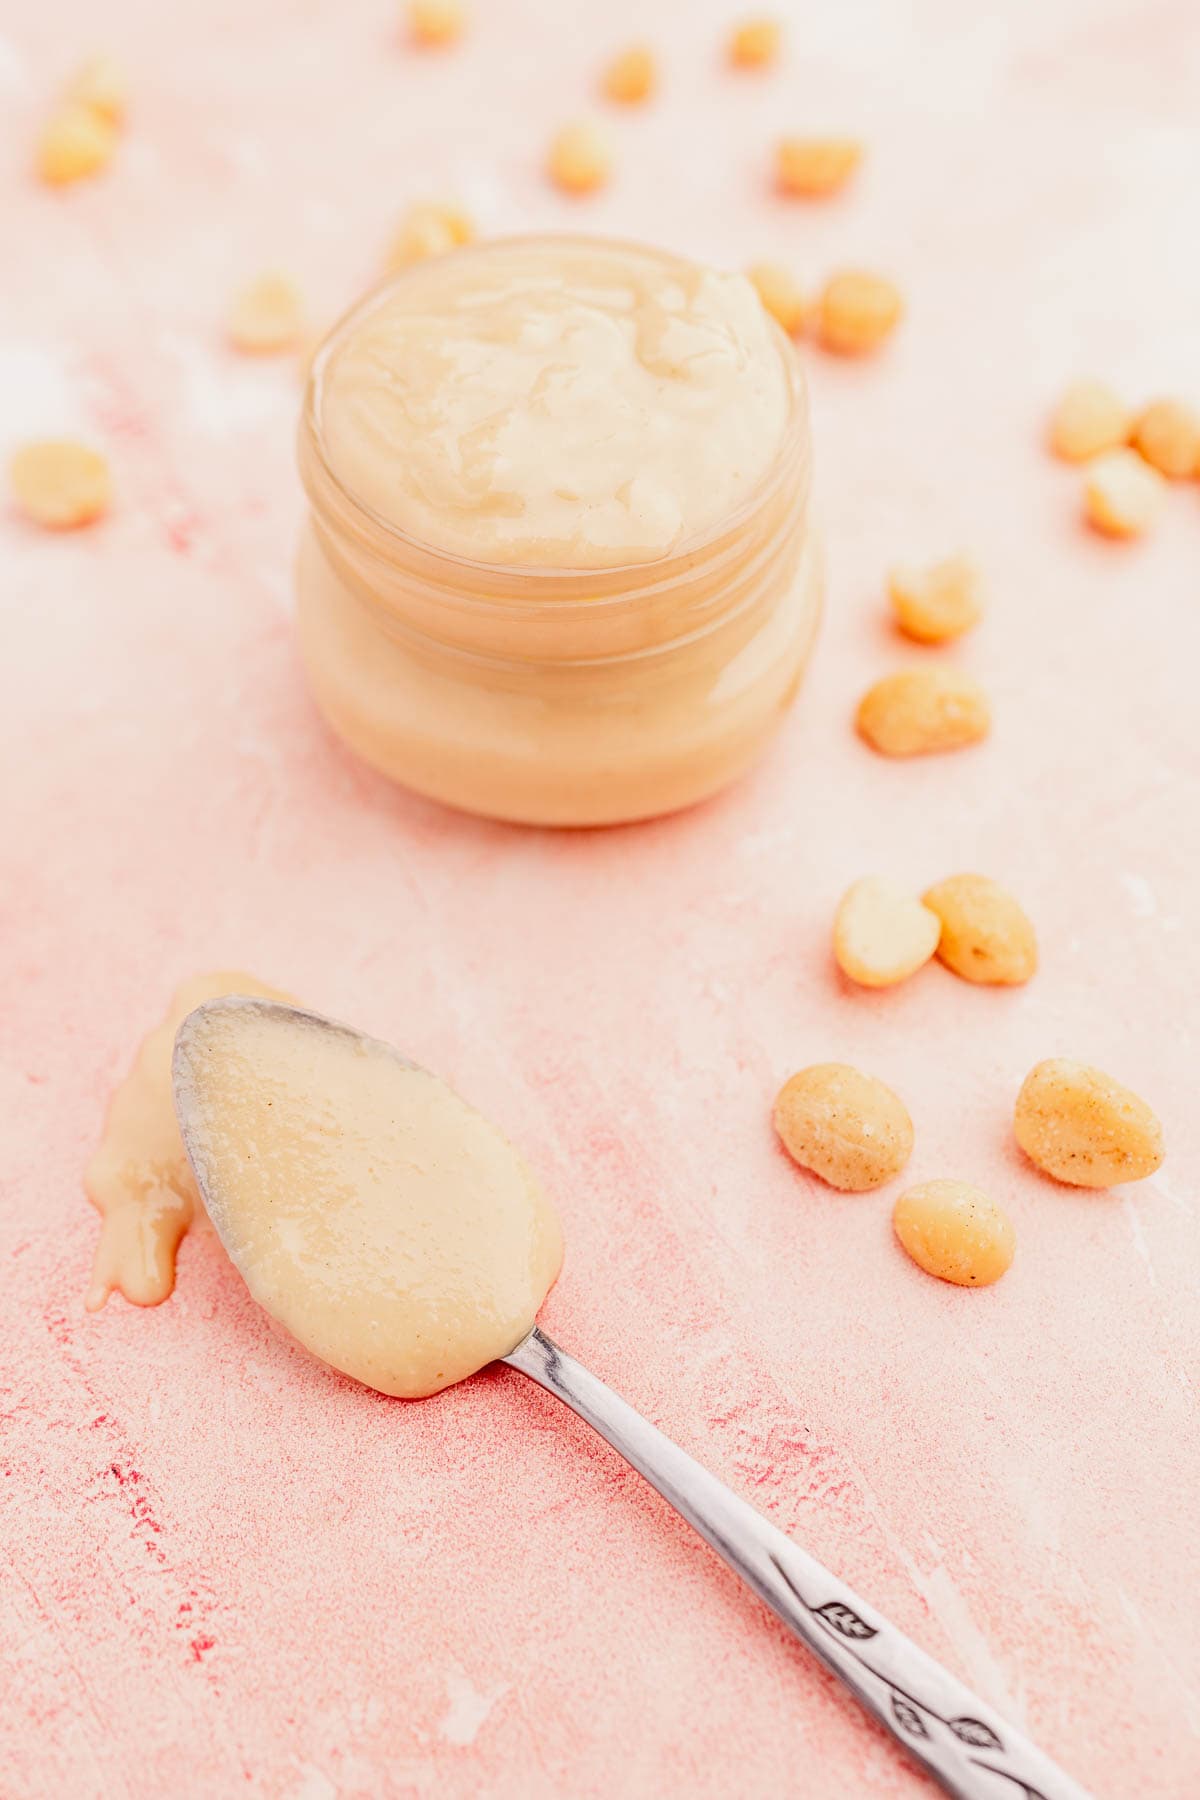 A jar of creamy macadamia nut butter with a spoonful beside it and scattered peanuts on a pink surface.